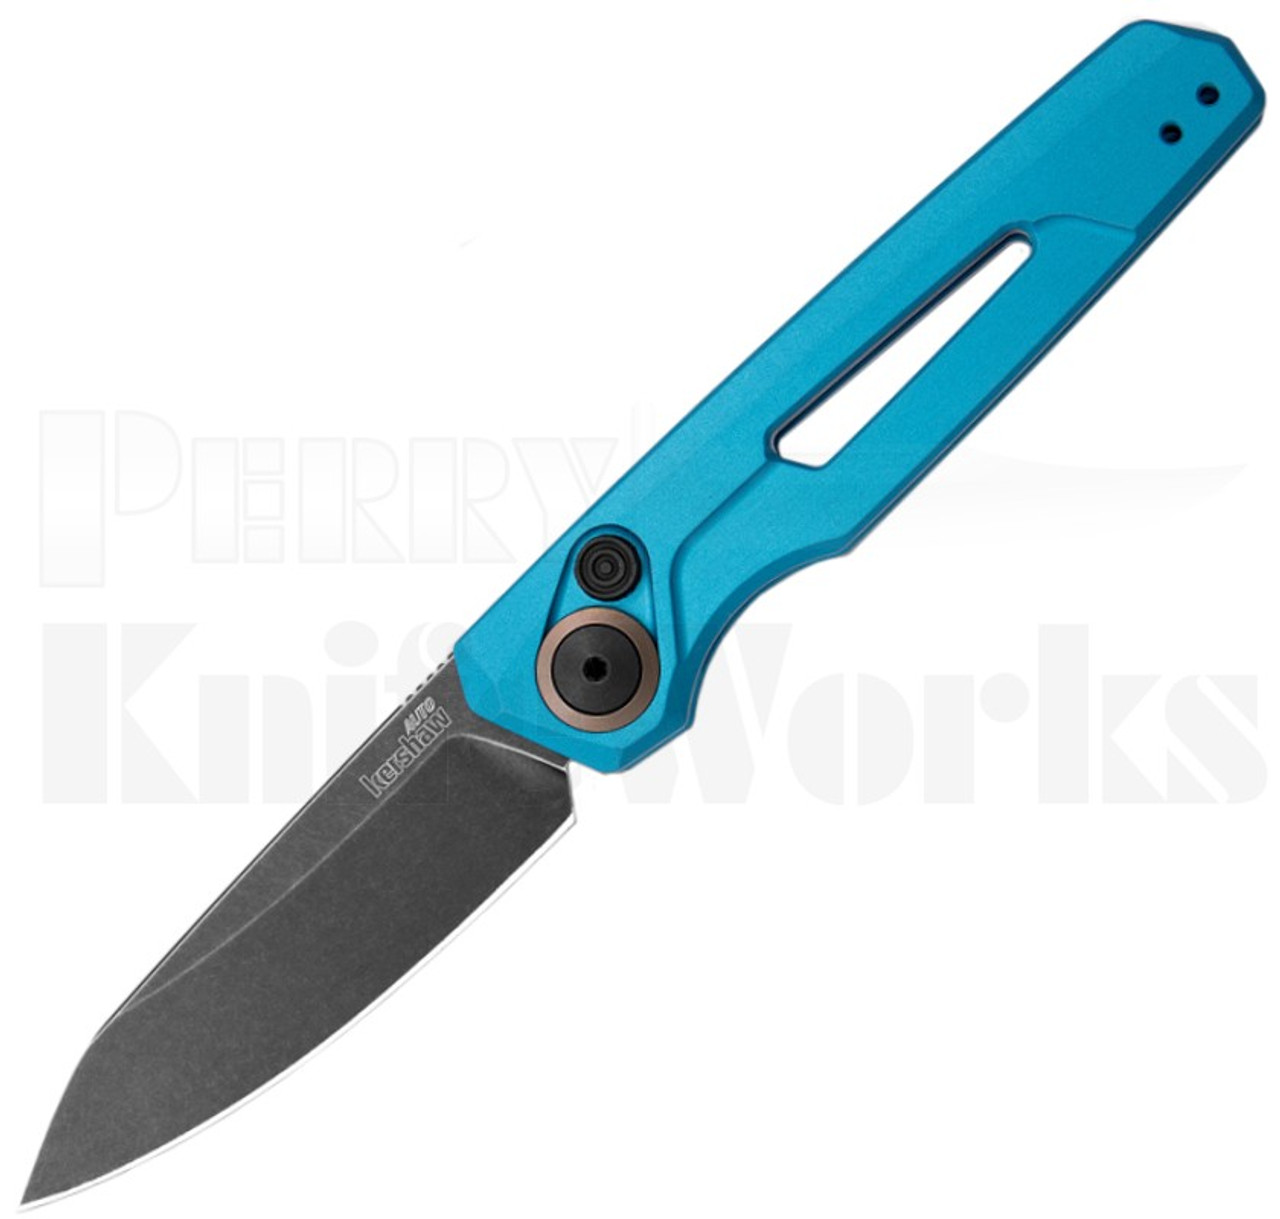 Kershaw Launch 11 Automatic Knife Teal 7550TEAL l For Sale